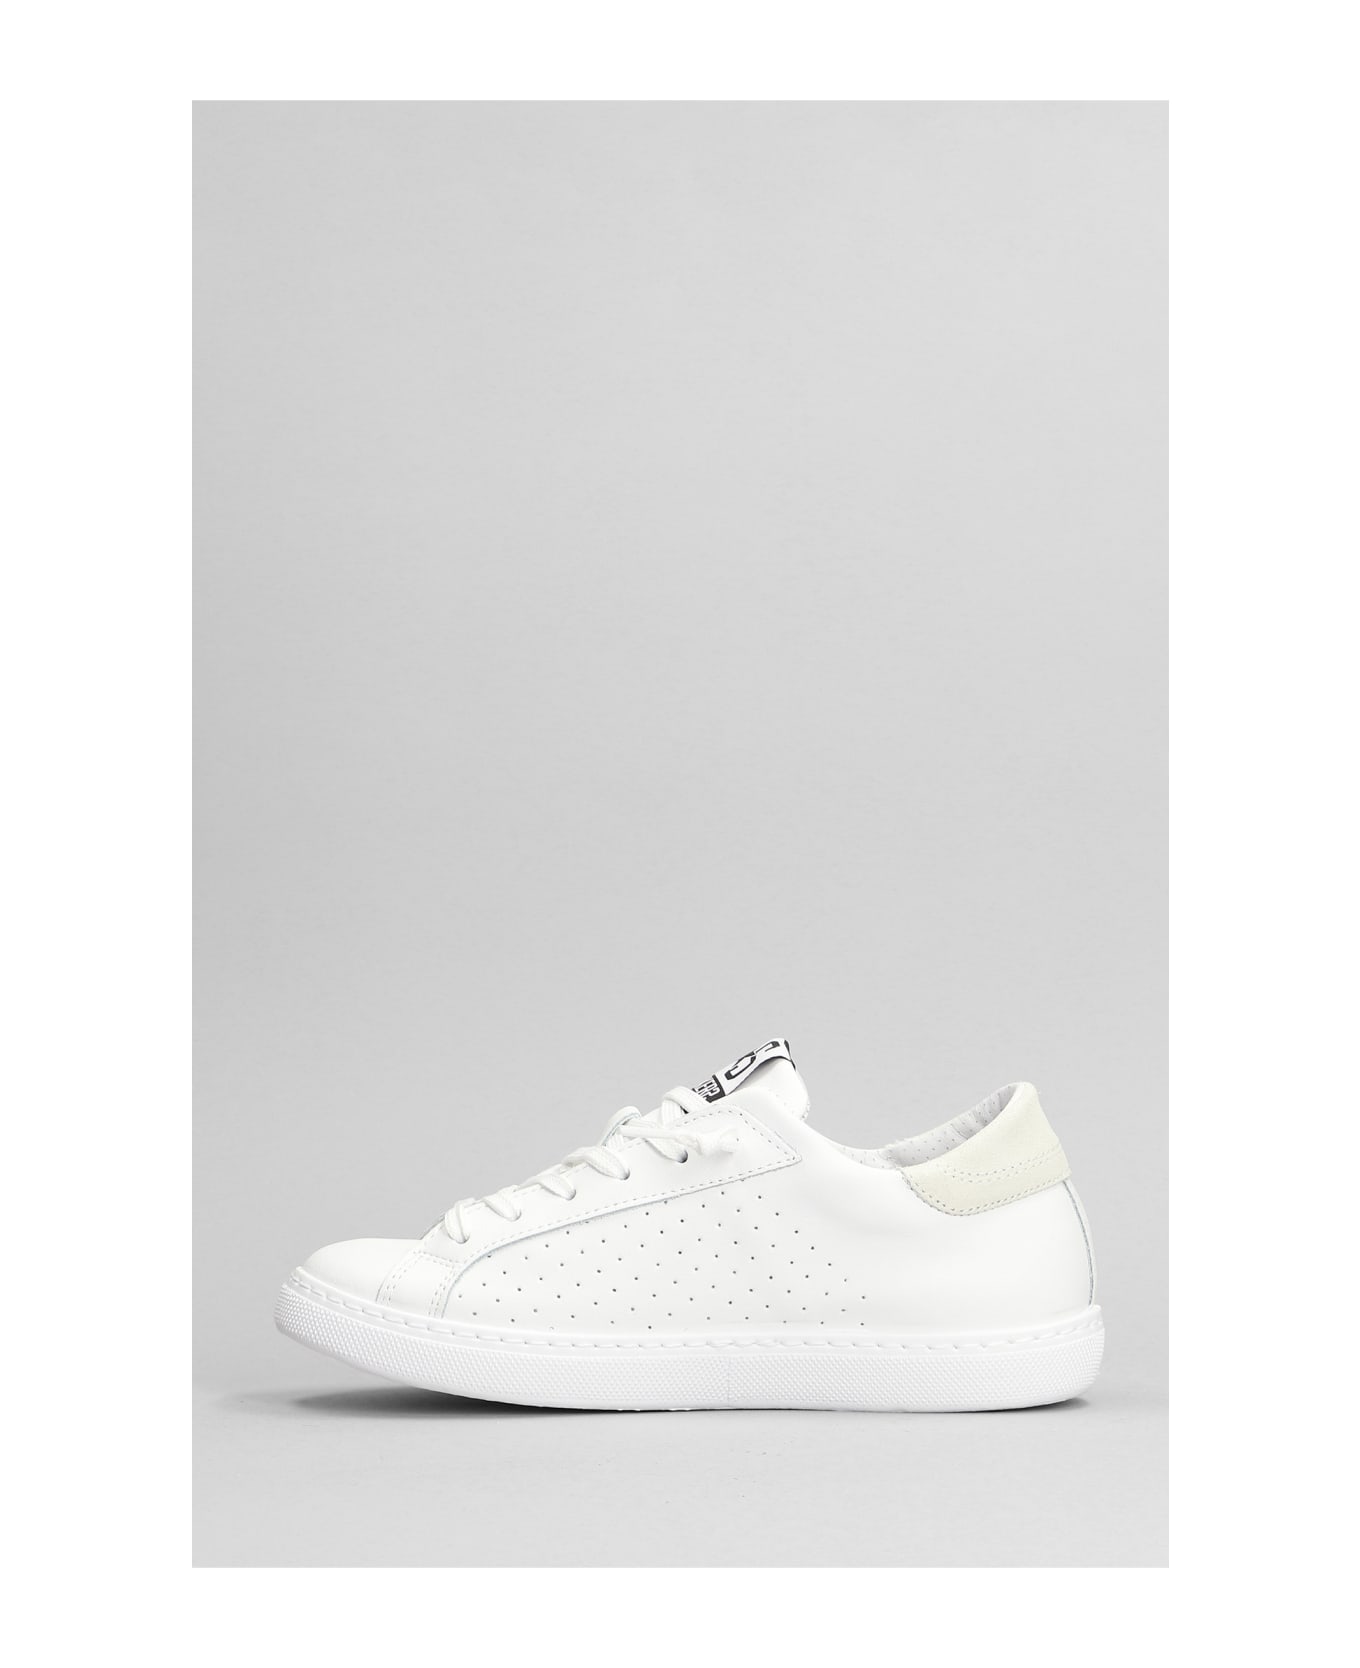 2Star One Star Sneakers In White Suede And Leather - white スニーカー